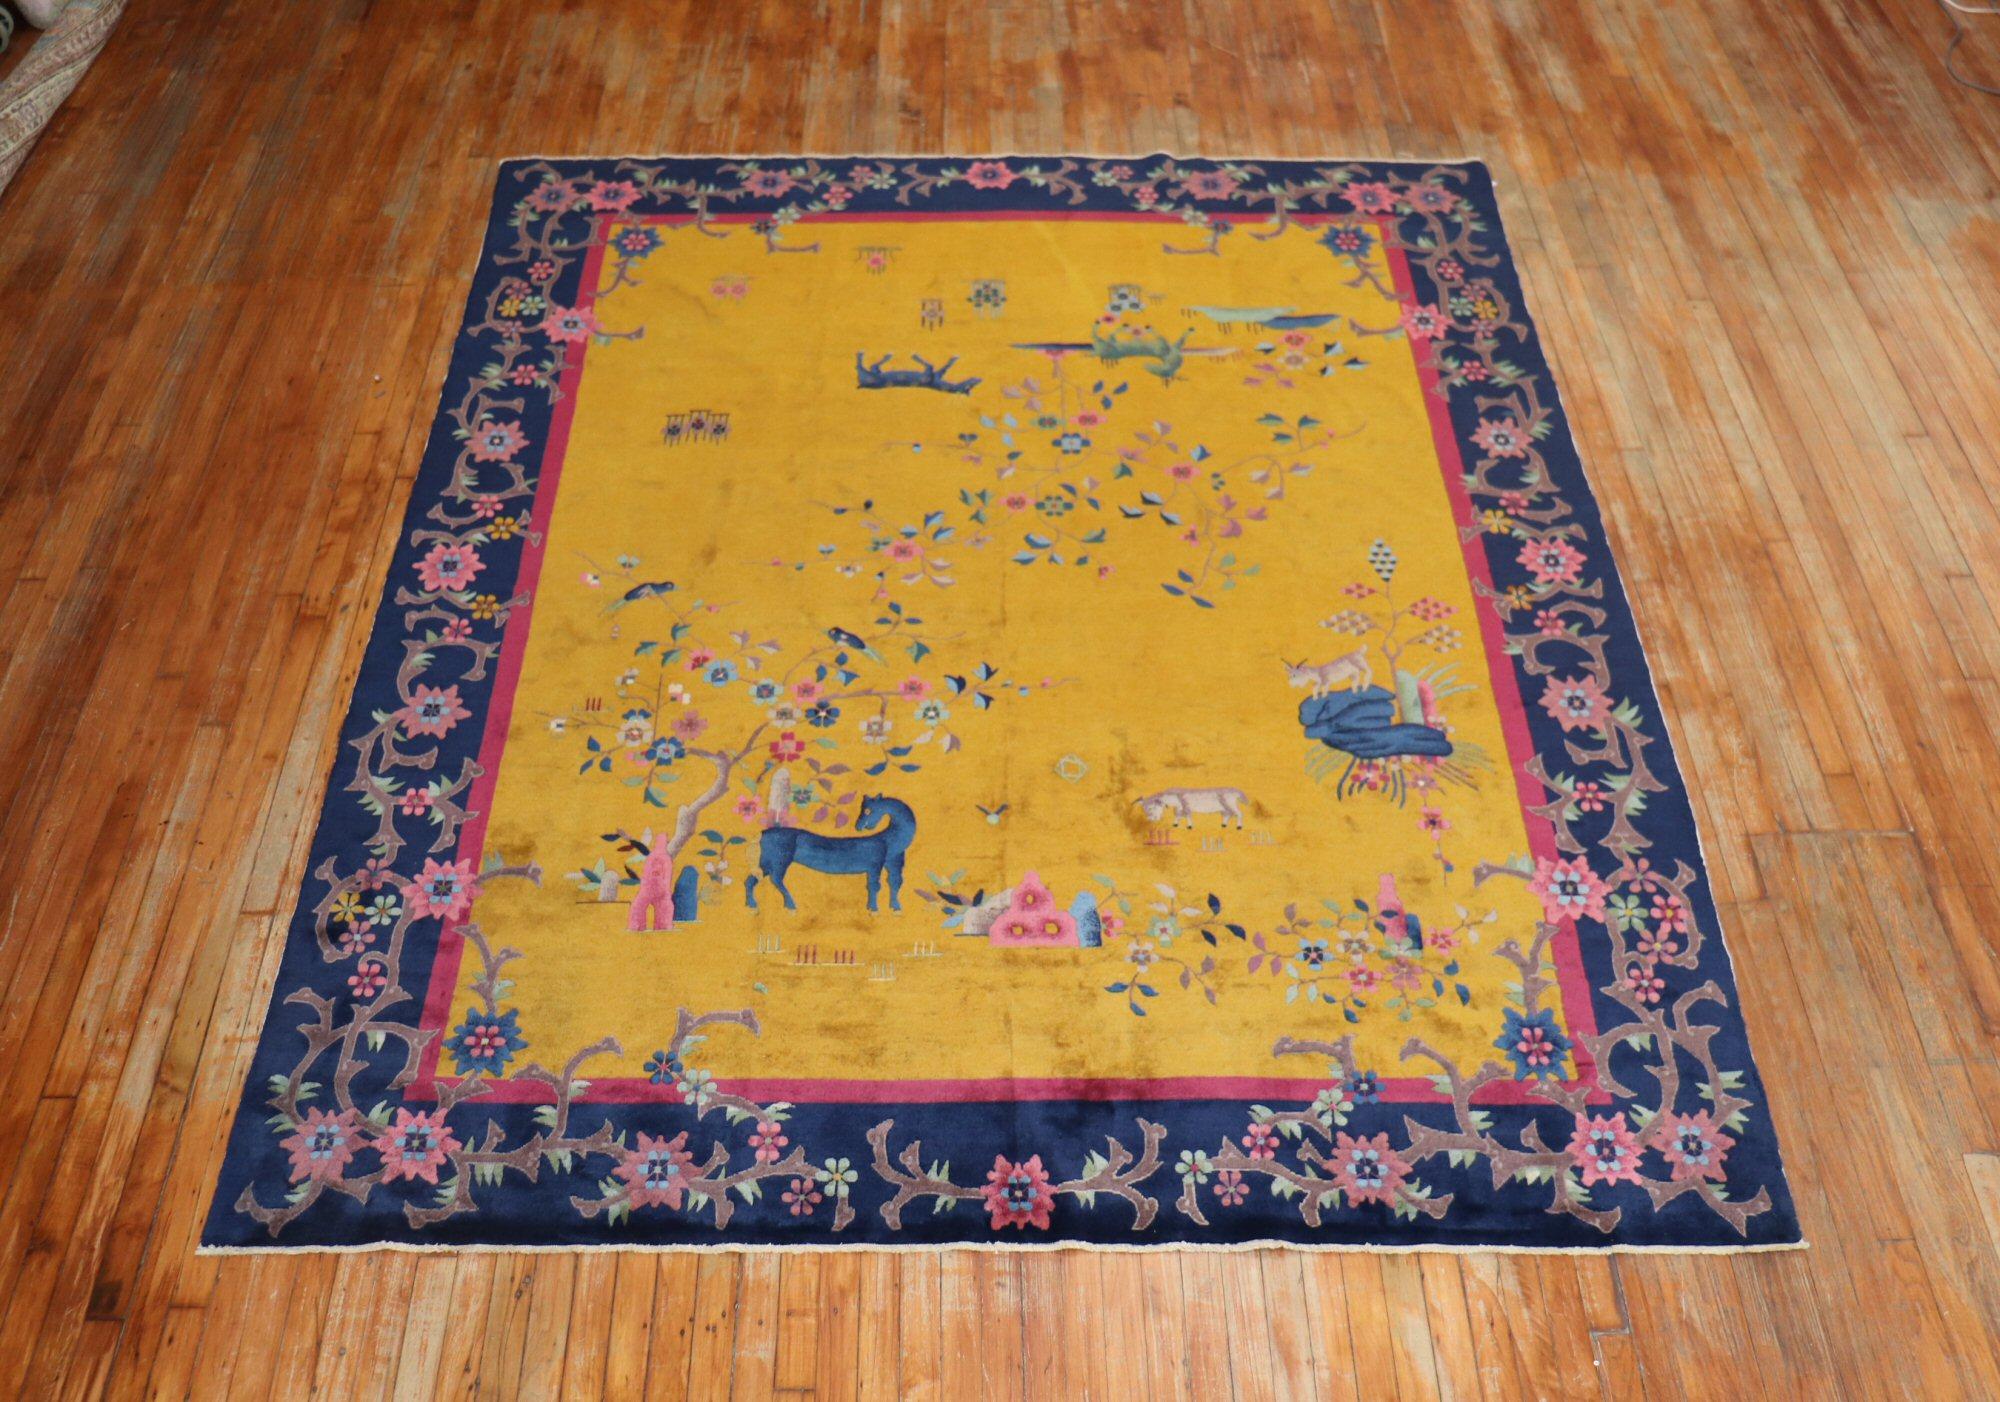 A Chinese Art Deco Nichols rug with a pictorial animal design on a goldenrod field surrounded by a pink and plum floral motif navy border

Measures: 7’10” x 9' 8